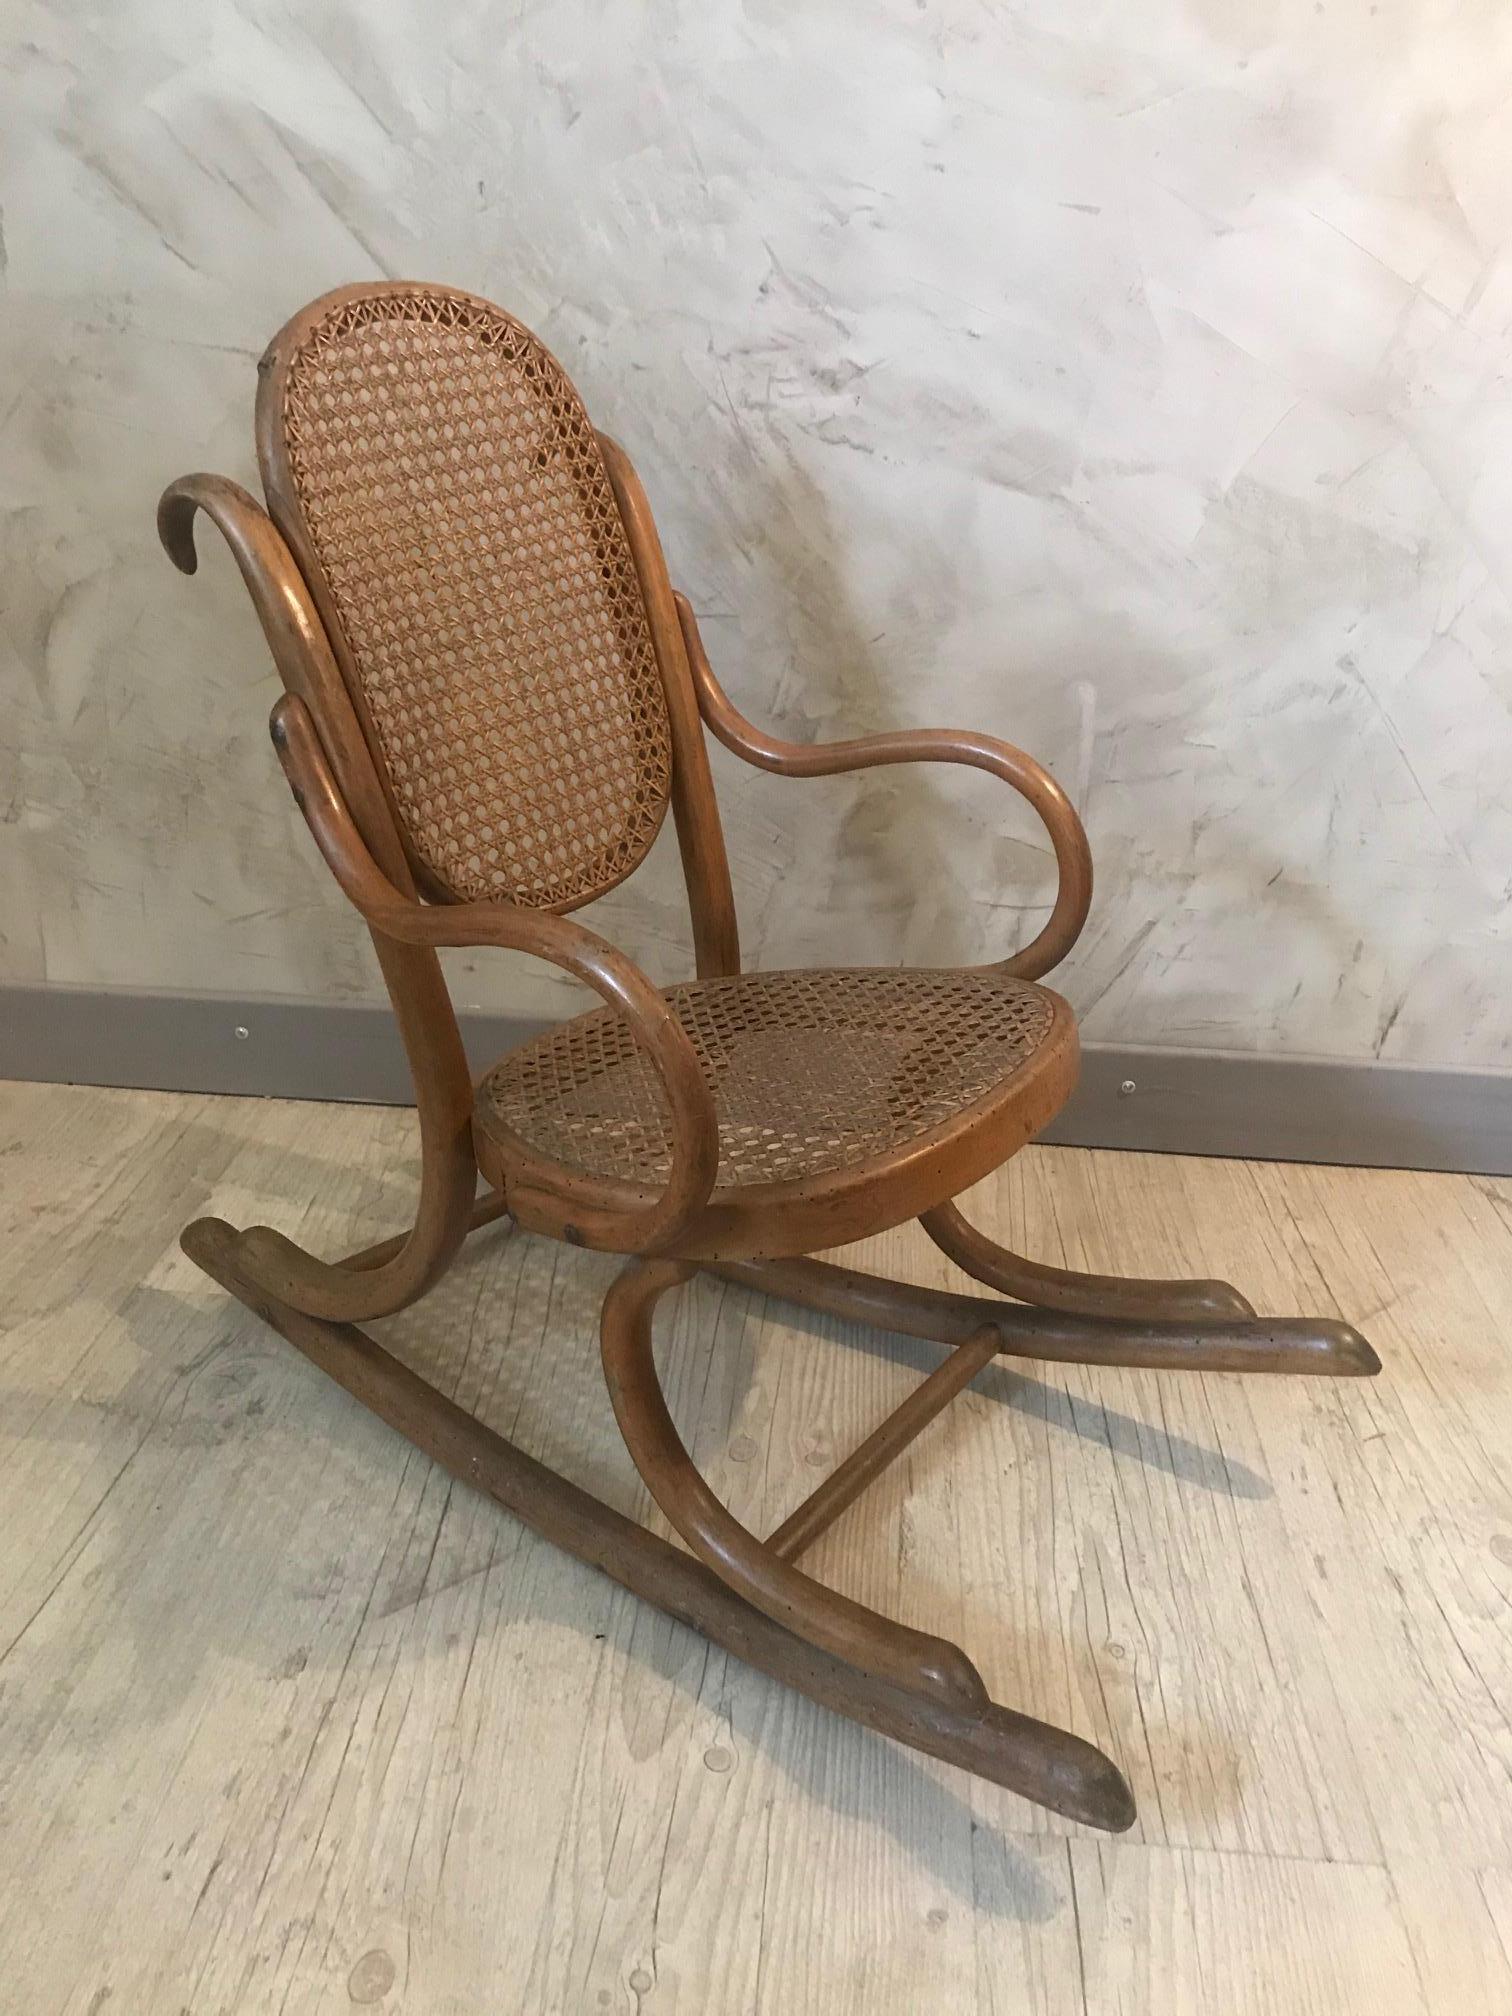 Very nice and rare 20th century French wood and cane child rocking chair from the 1920s. 
Caned seating and back. In the style of Thonet. 
Show some consistent with age and use but good general condition.
Very nice quality.